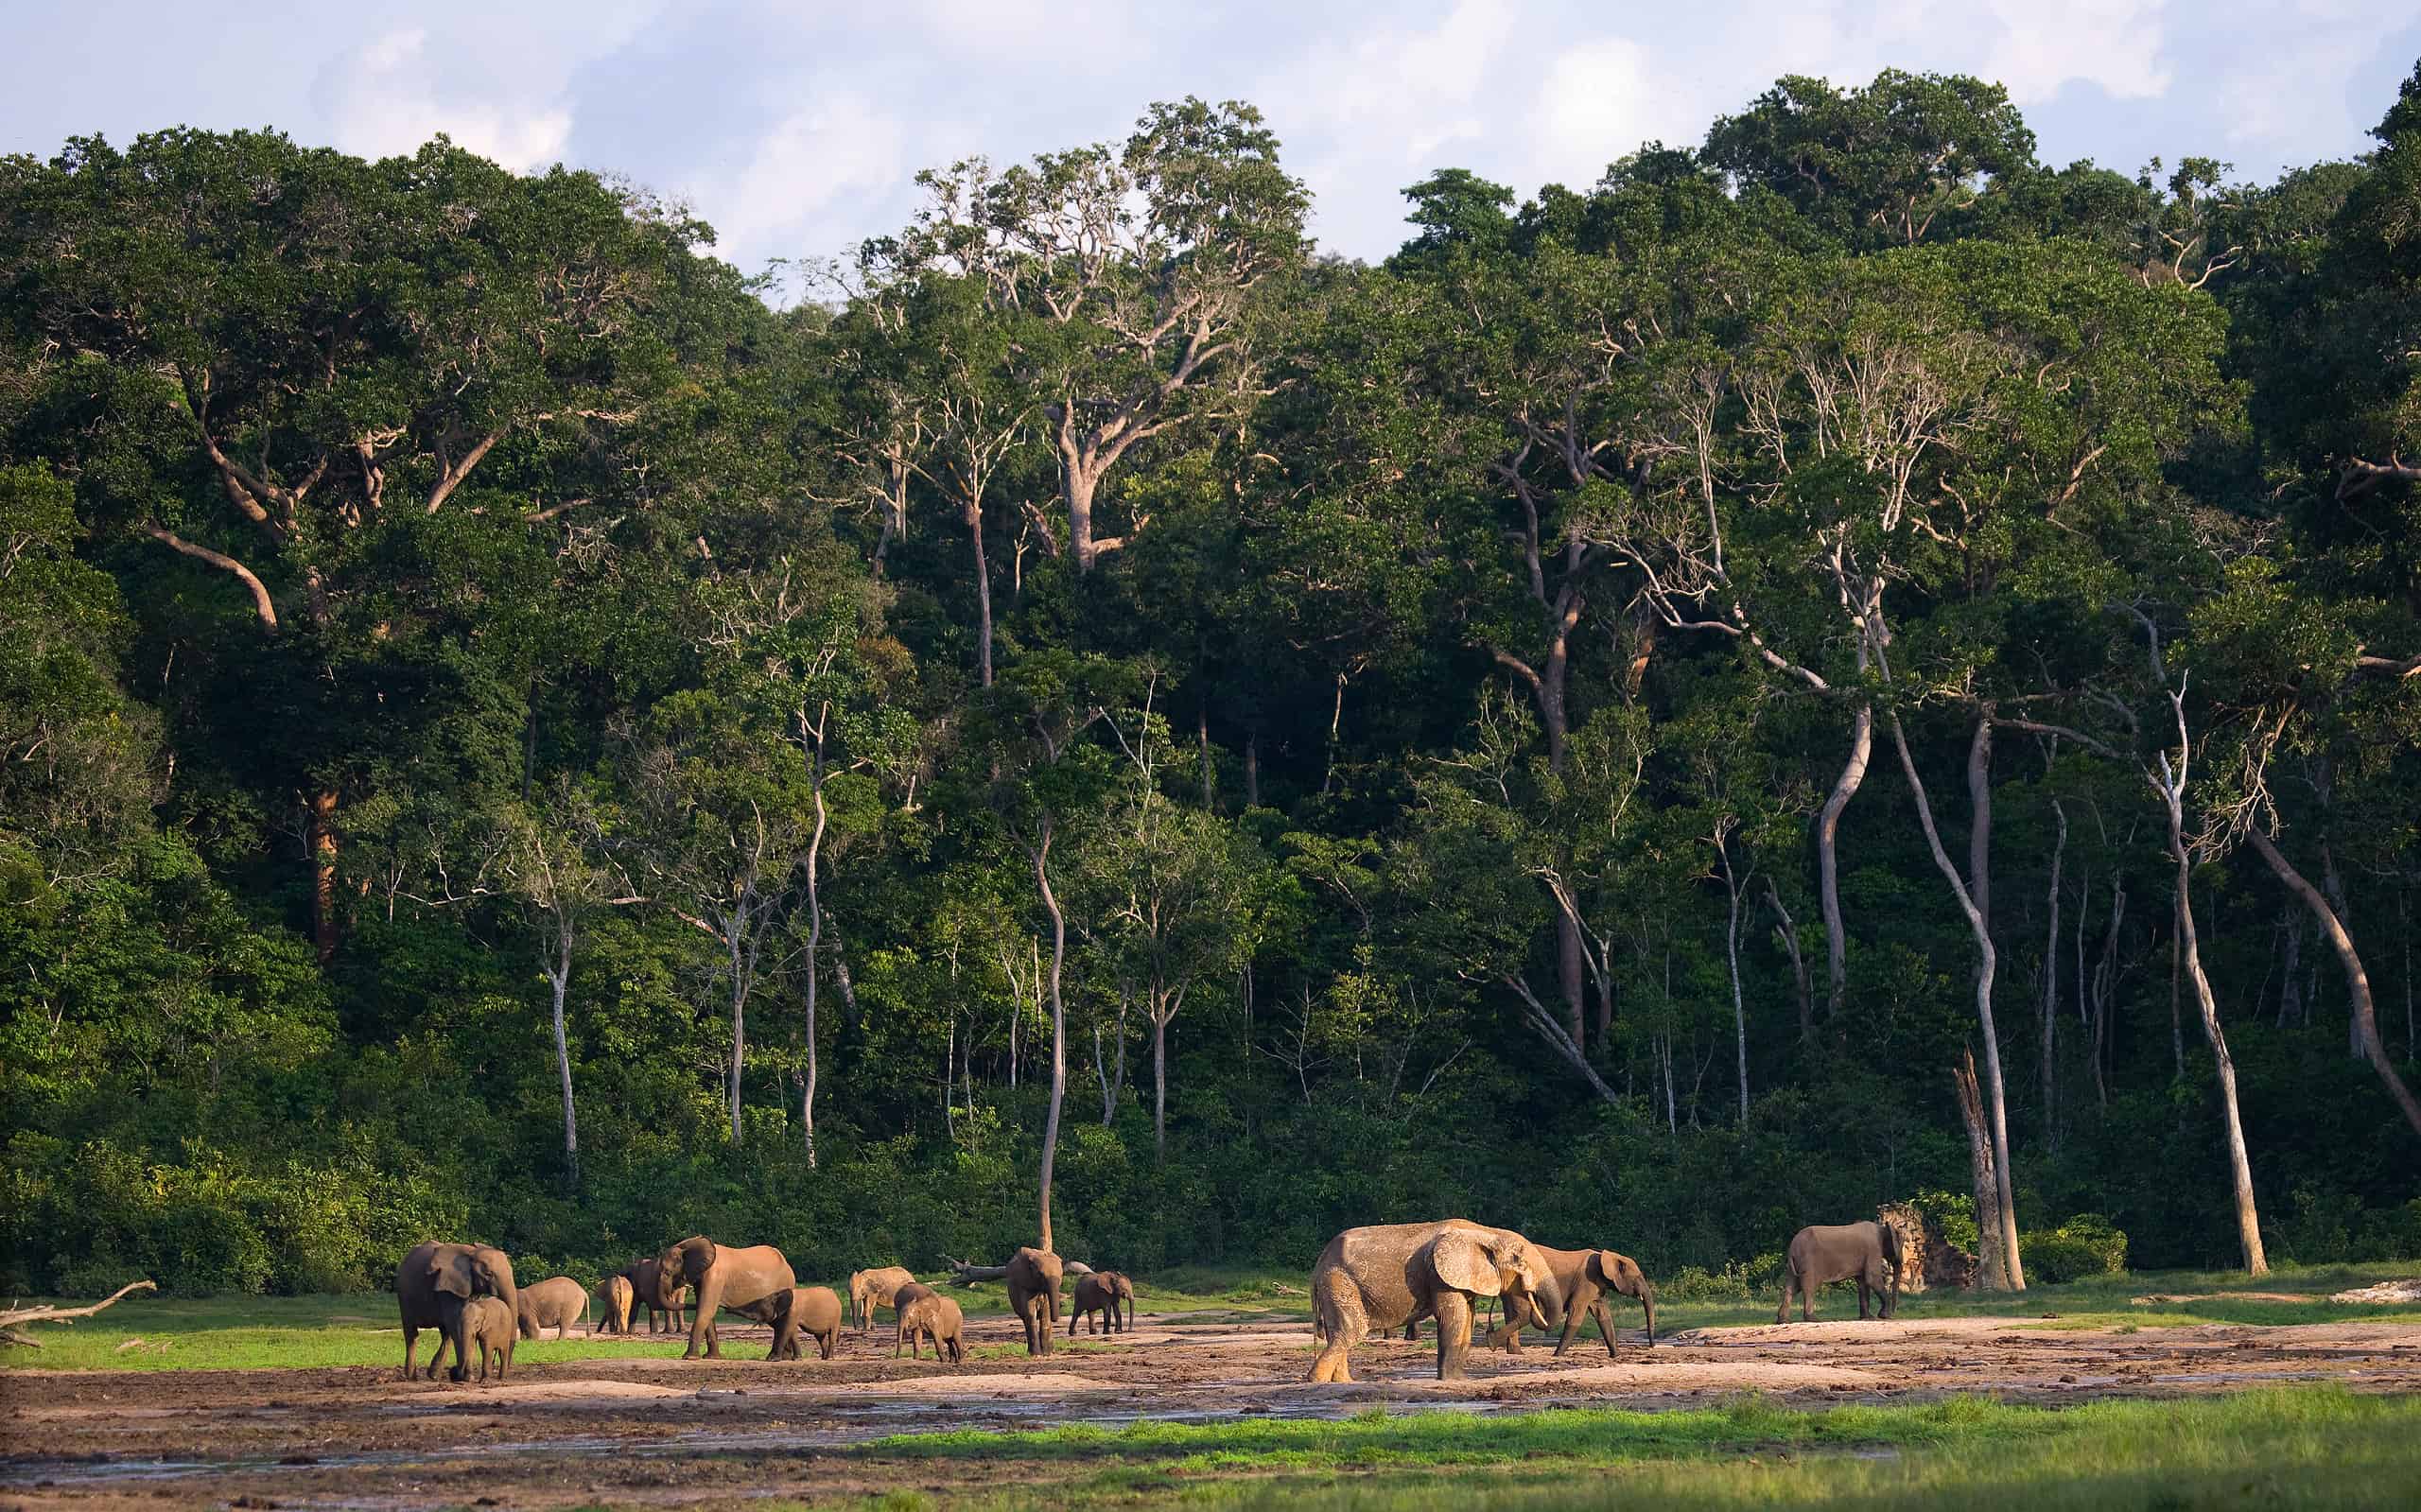 Group of forest elephants in the forest edge. Republic of Congo. Dzanga-Sangha Special Reserve. Central African Republic.